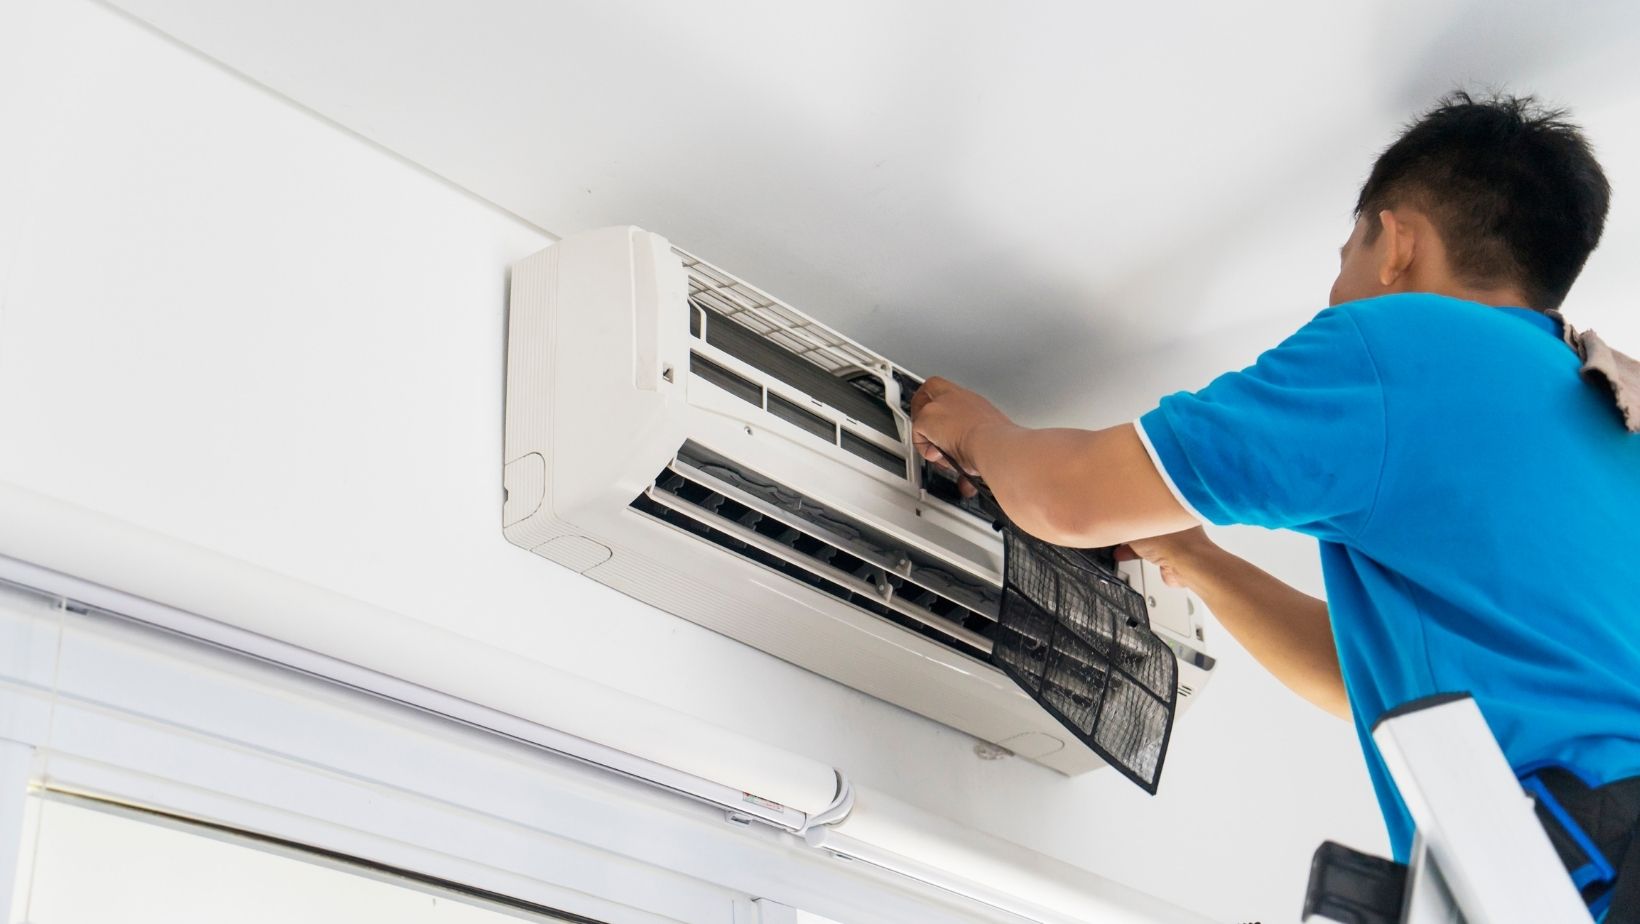 stock image from canva of someone changing an air conditioning filter